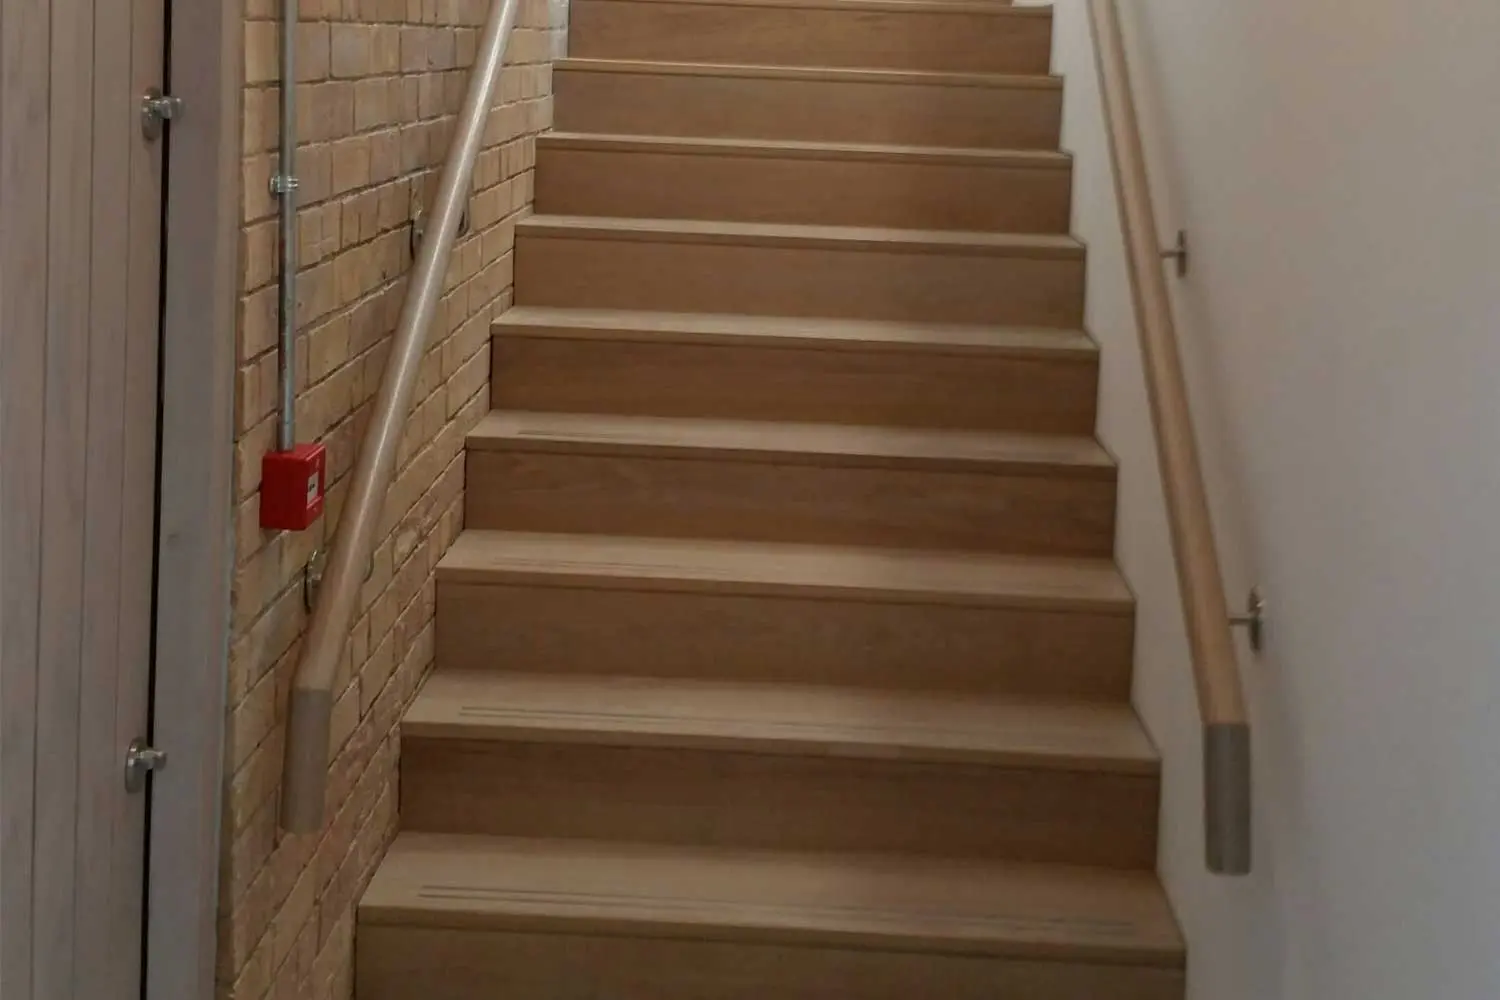 OMC Technologies - Feature stairs and flood prevention barriers at Sir John Rogerson's Quay